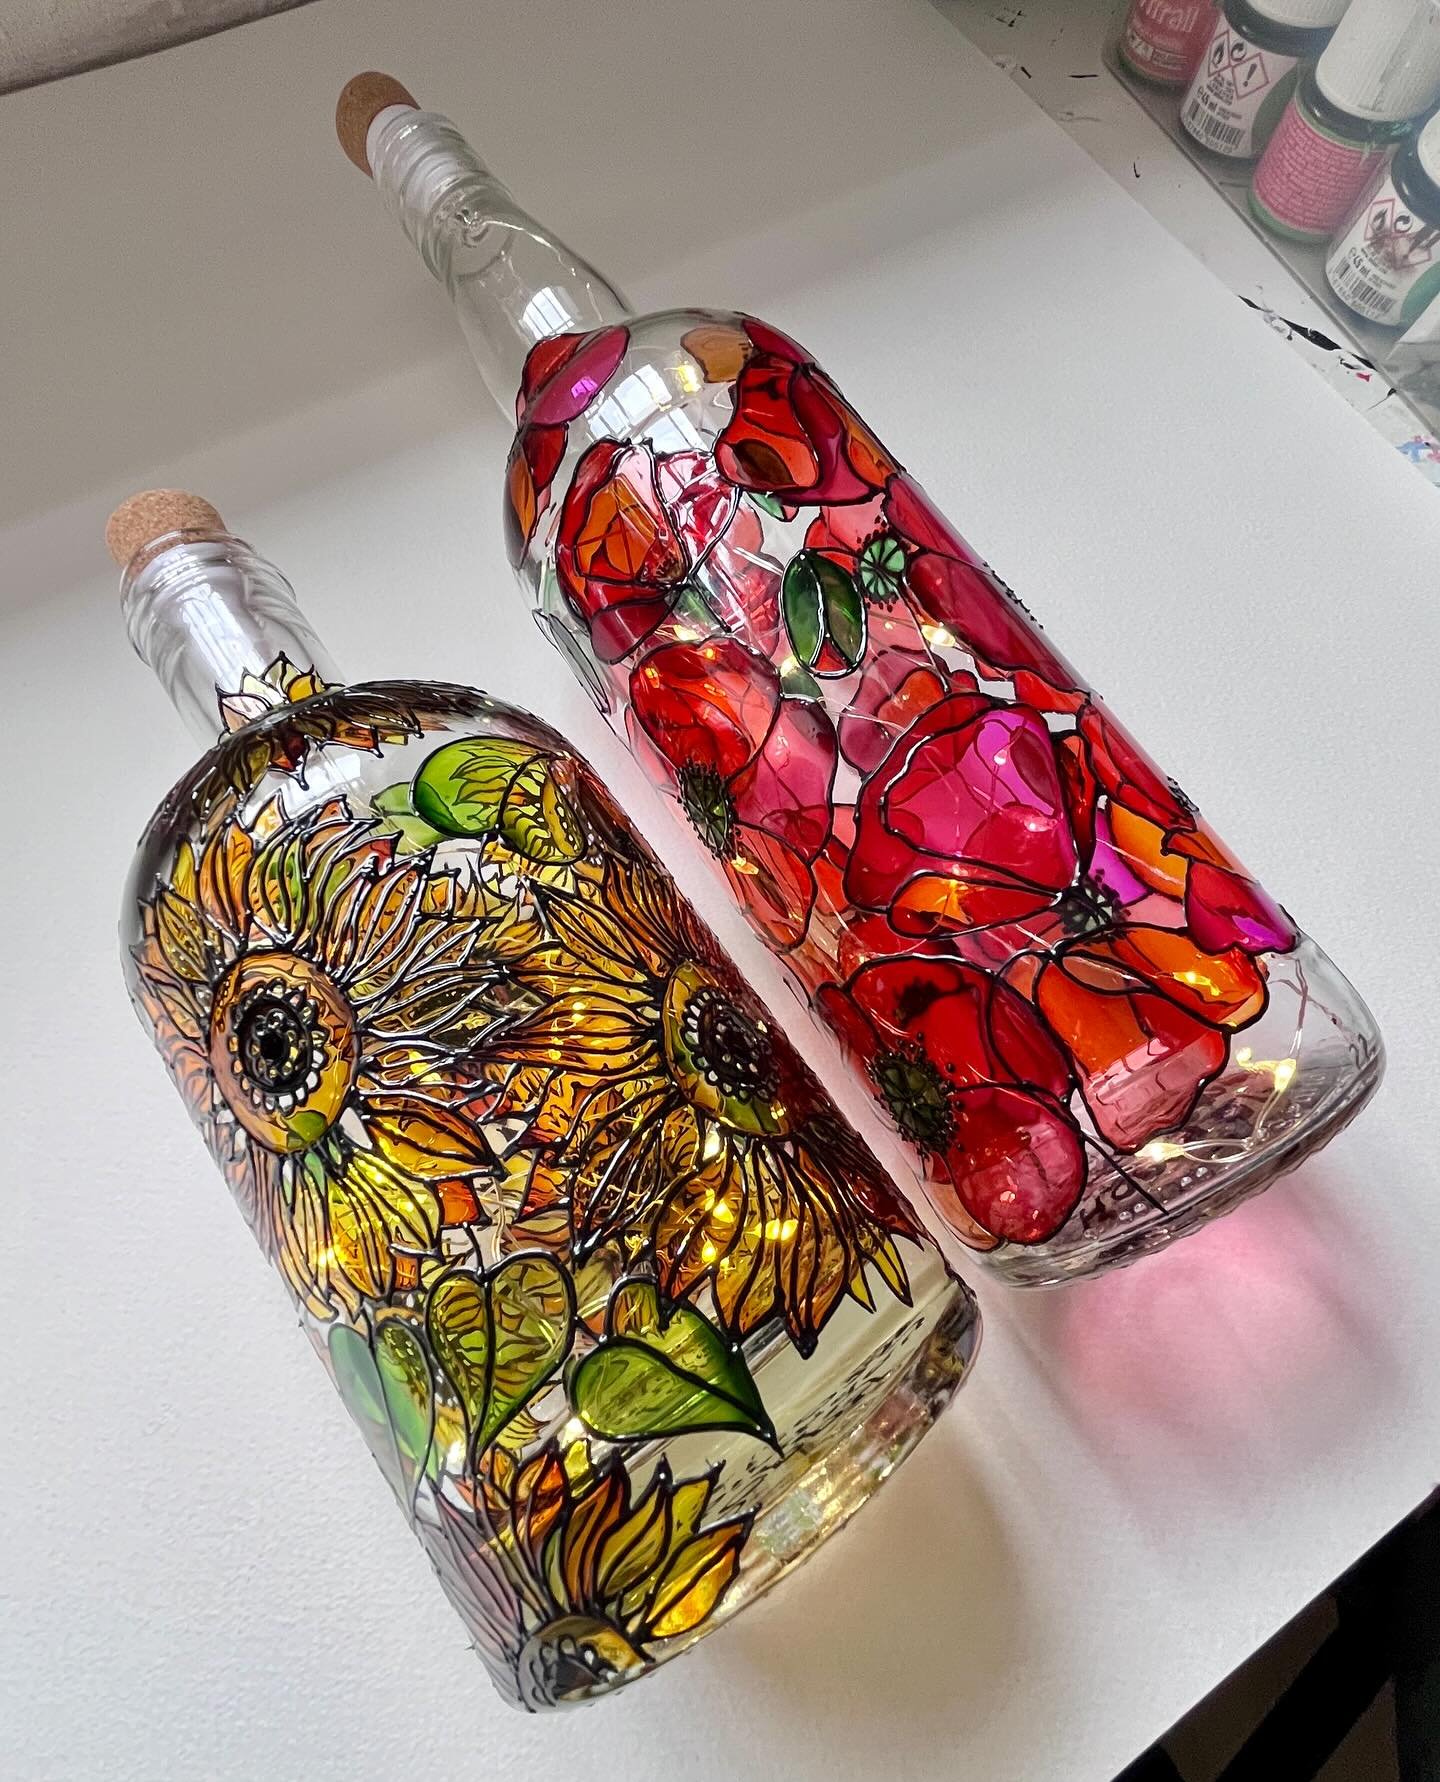 It&rsquo;s a while since I painted glass but my beautiful niece, Poppy, asked for poppy and sunflower bottles for her 21st birthday so I made her these. Happy birthday Pops xx

#glasspainting #21stbirthdaypresent #poppy #sunflower